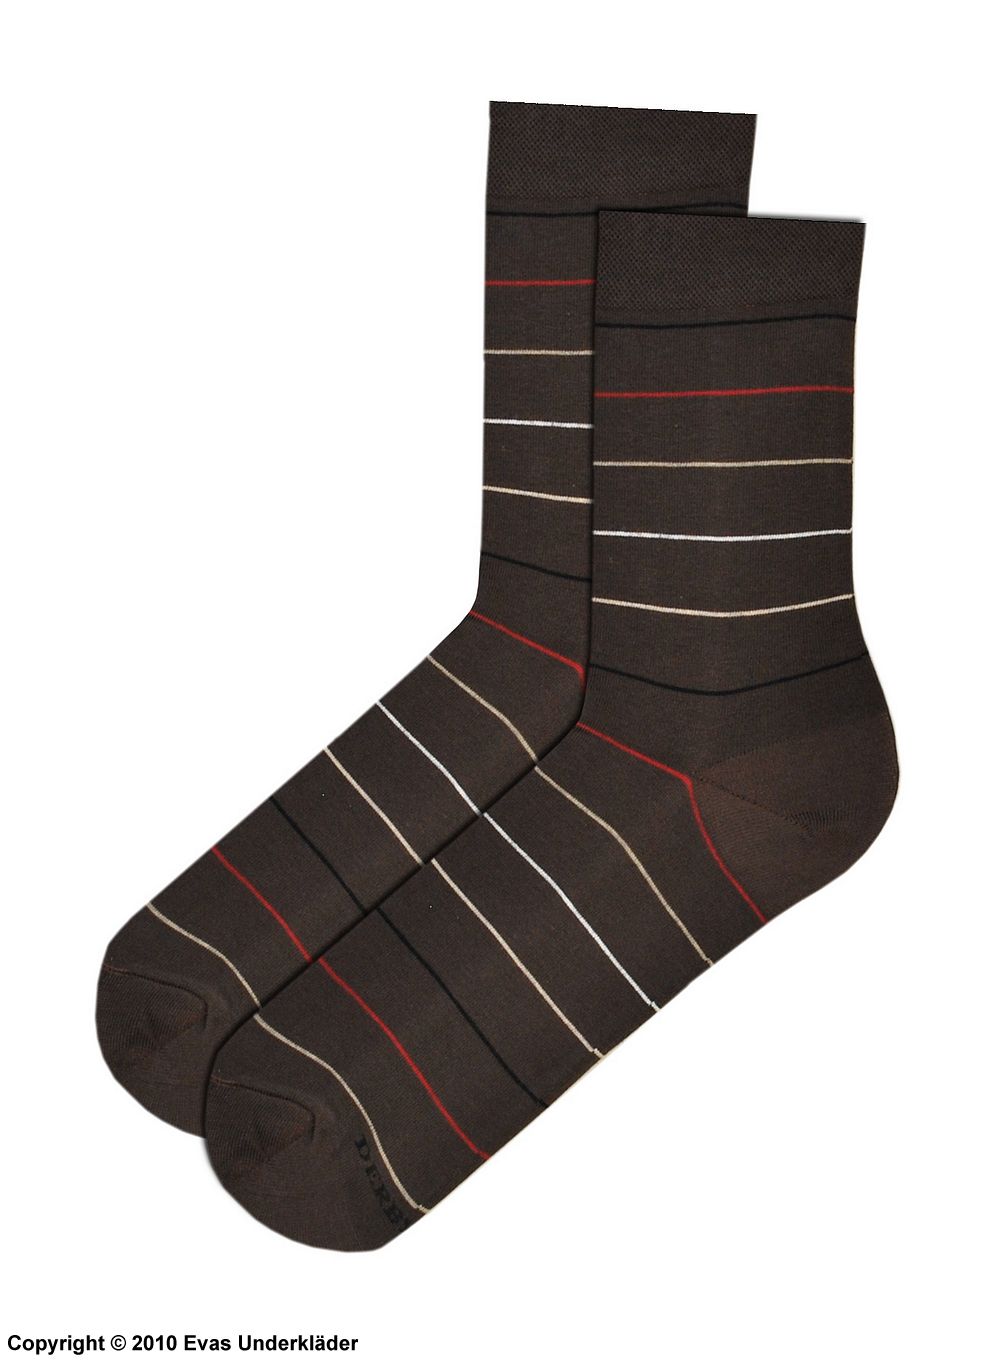 Brown socks with thin stripes